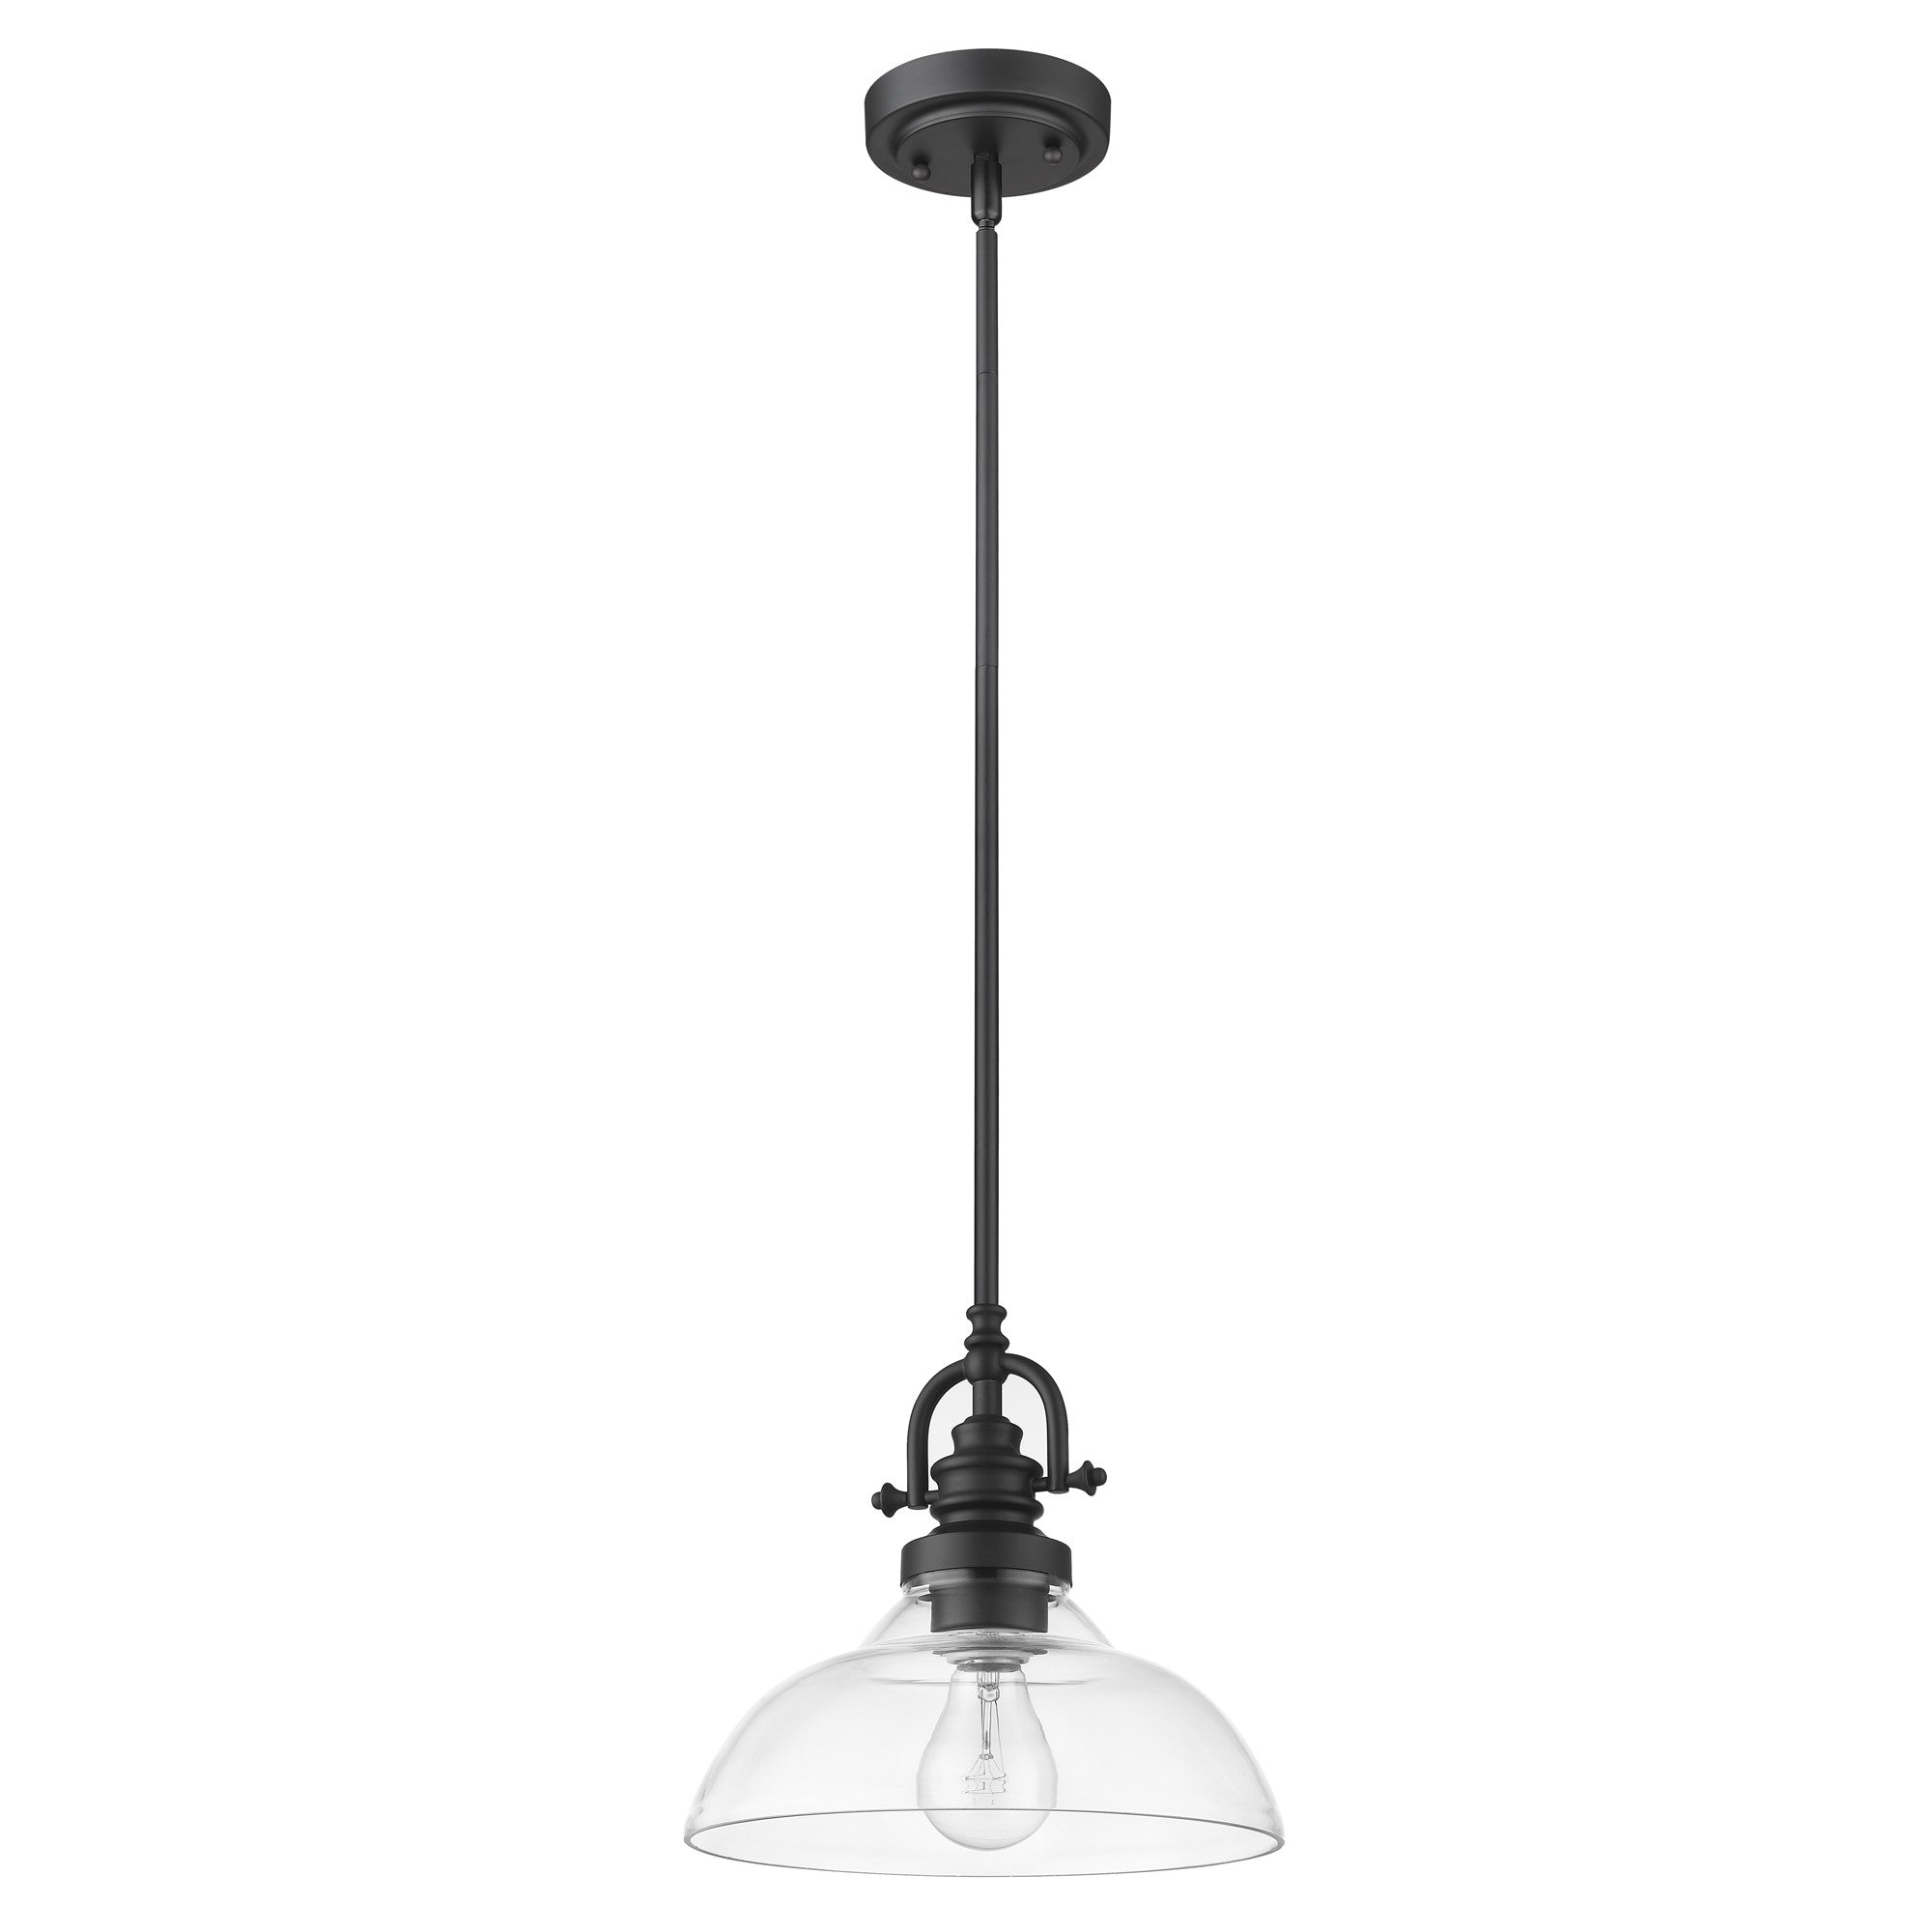 Matte Black Hanging Light with Glass Dome Shade